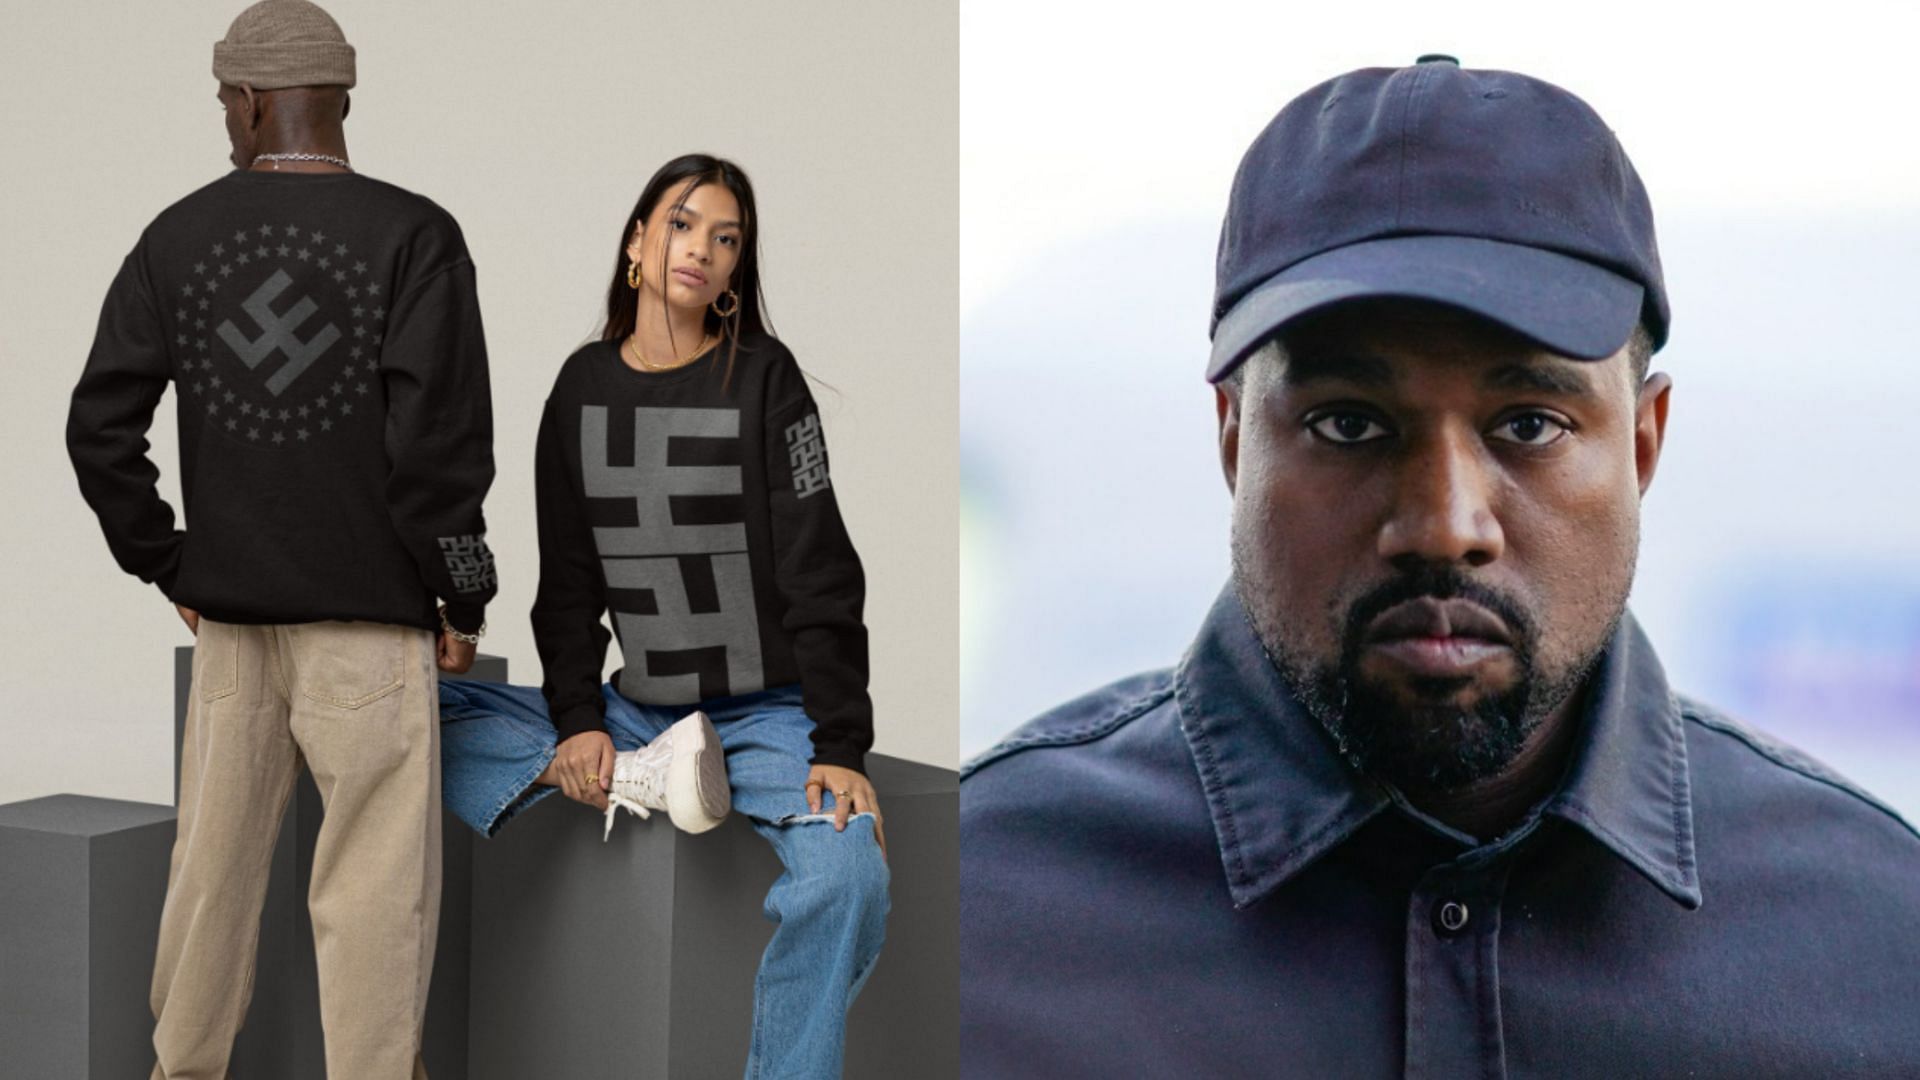 Fake Nazi sweatshirts allegedly designed by Kanye West go viral on social media (Image via FarAwayAndCozy/Twitter and AP)